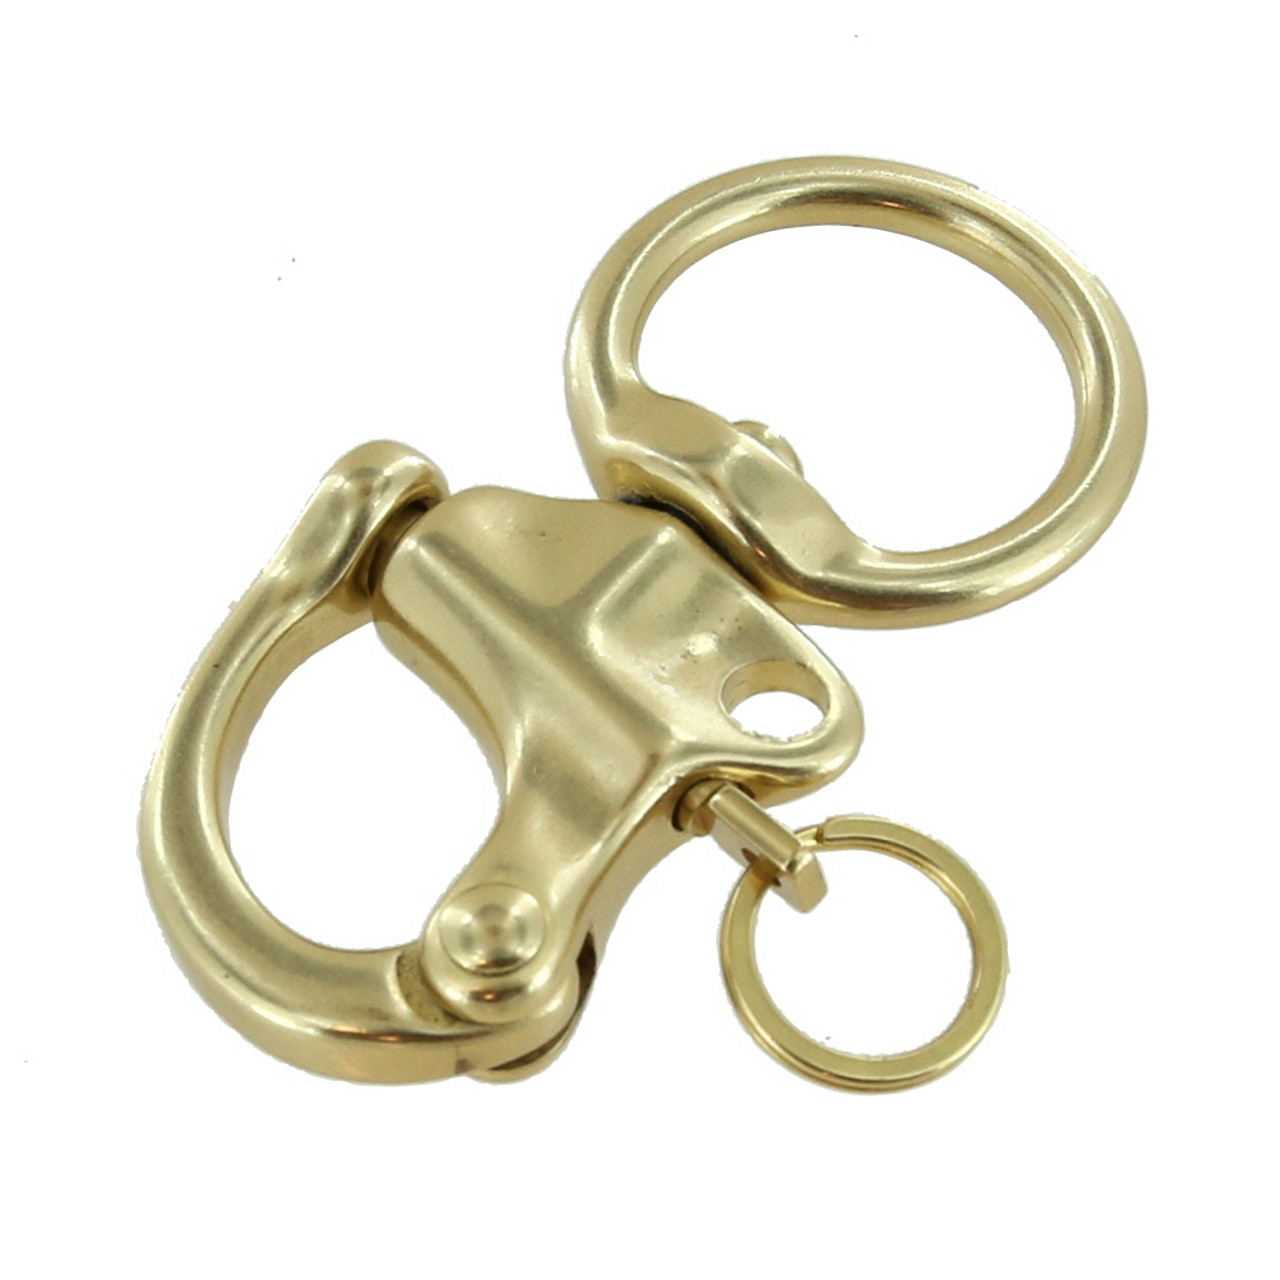 Heavy Duty Double End Snap Clip Key Ring - Solid Brass